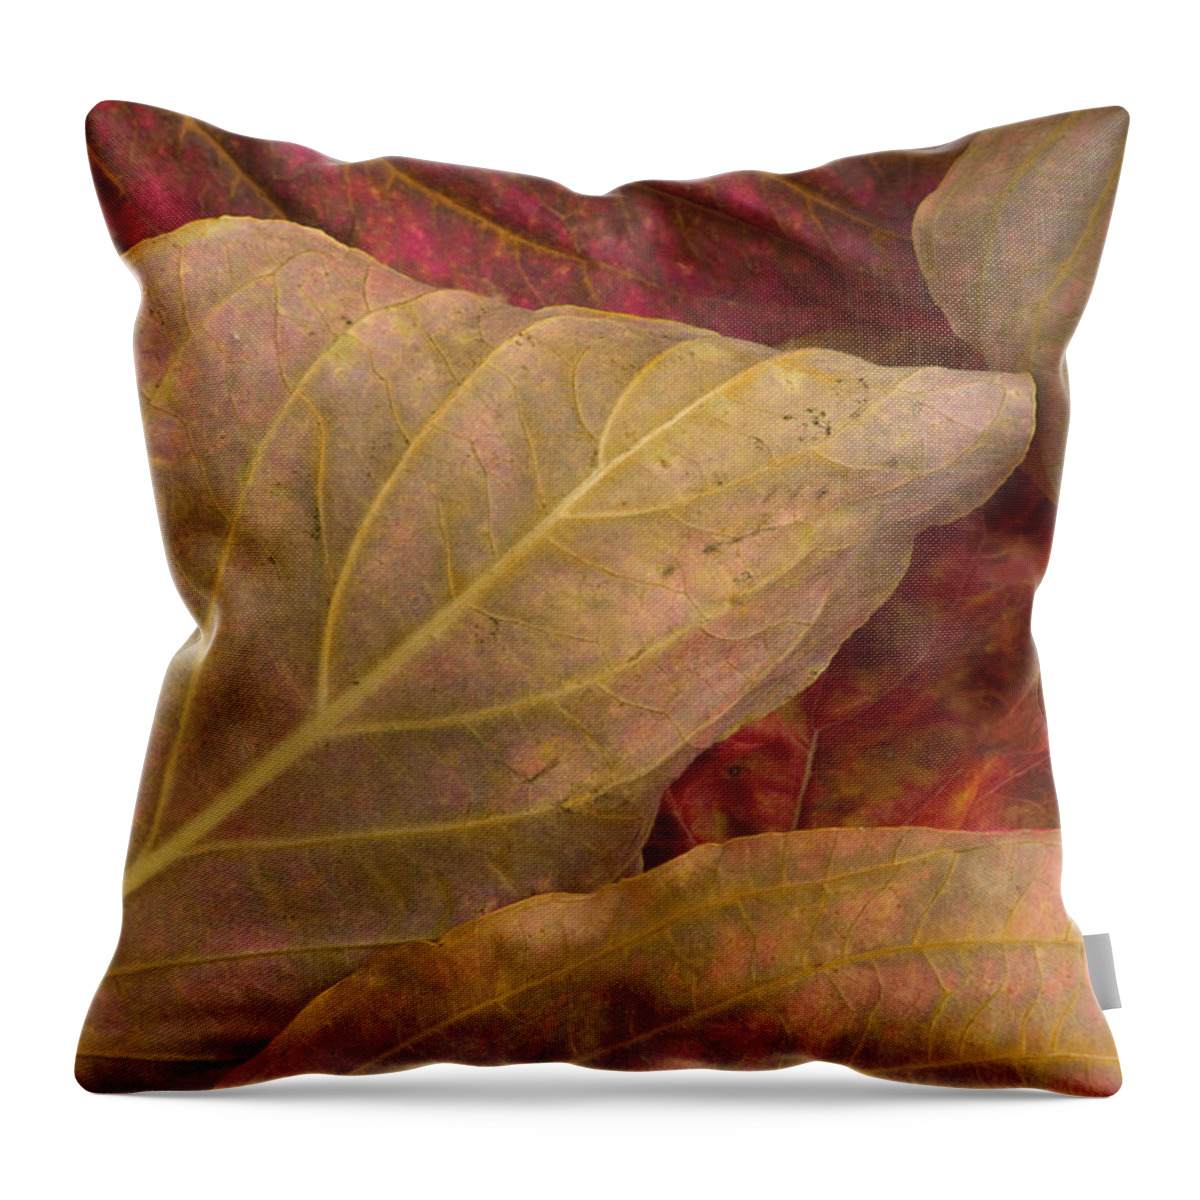 Natural Pattern Throw Pillow featuring the photograph Pacific Dogwood Leaves, Yosemite Np #1 by Eastcott Momatiuk